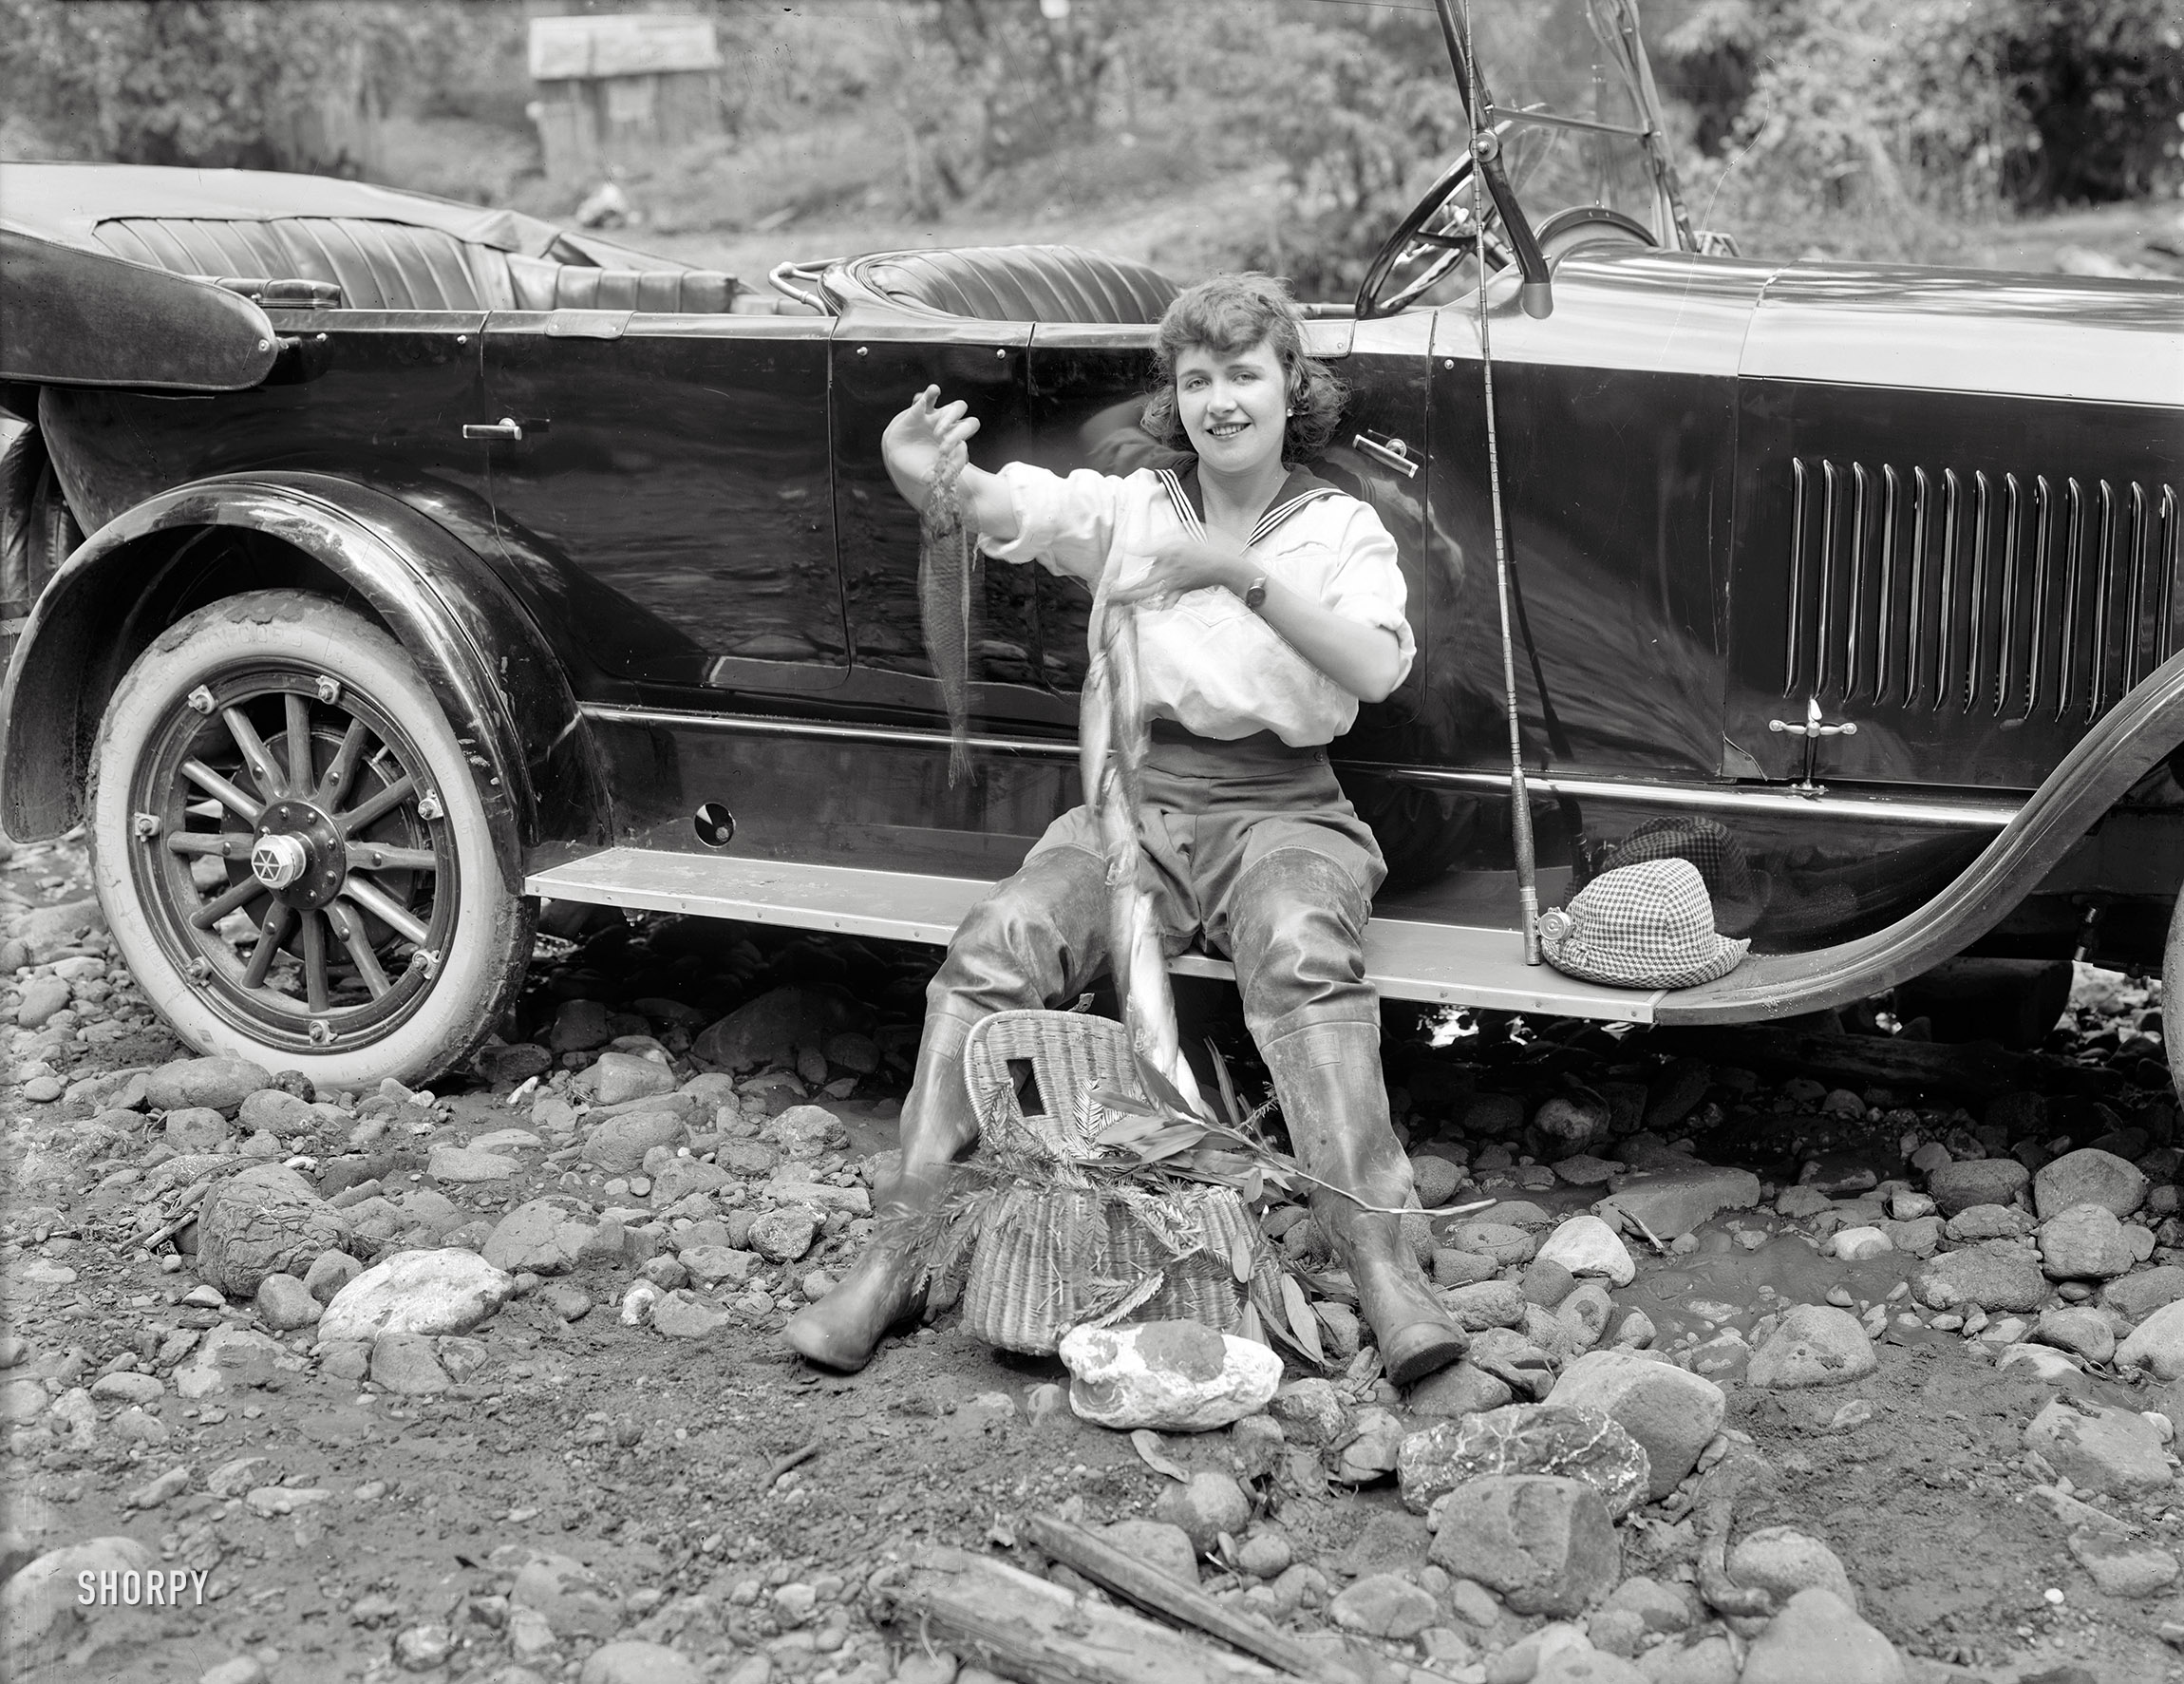 Circa 1919. "Angler next to Studebaker 'Big Six' touring car." One of the girls last seen here. 6.5 x 8.5 glass negative, scanned by Shorpy, originally from the Wyland Stanley Collection of San Francisco memorabilia. View full size.